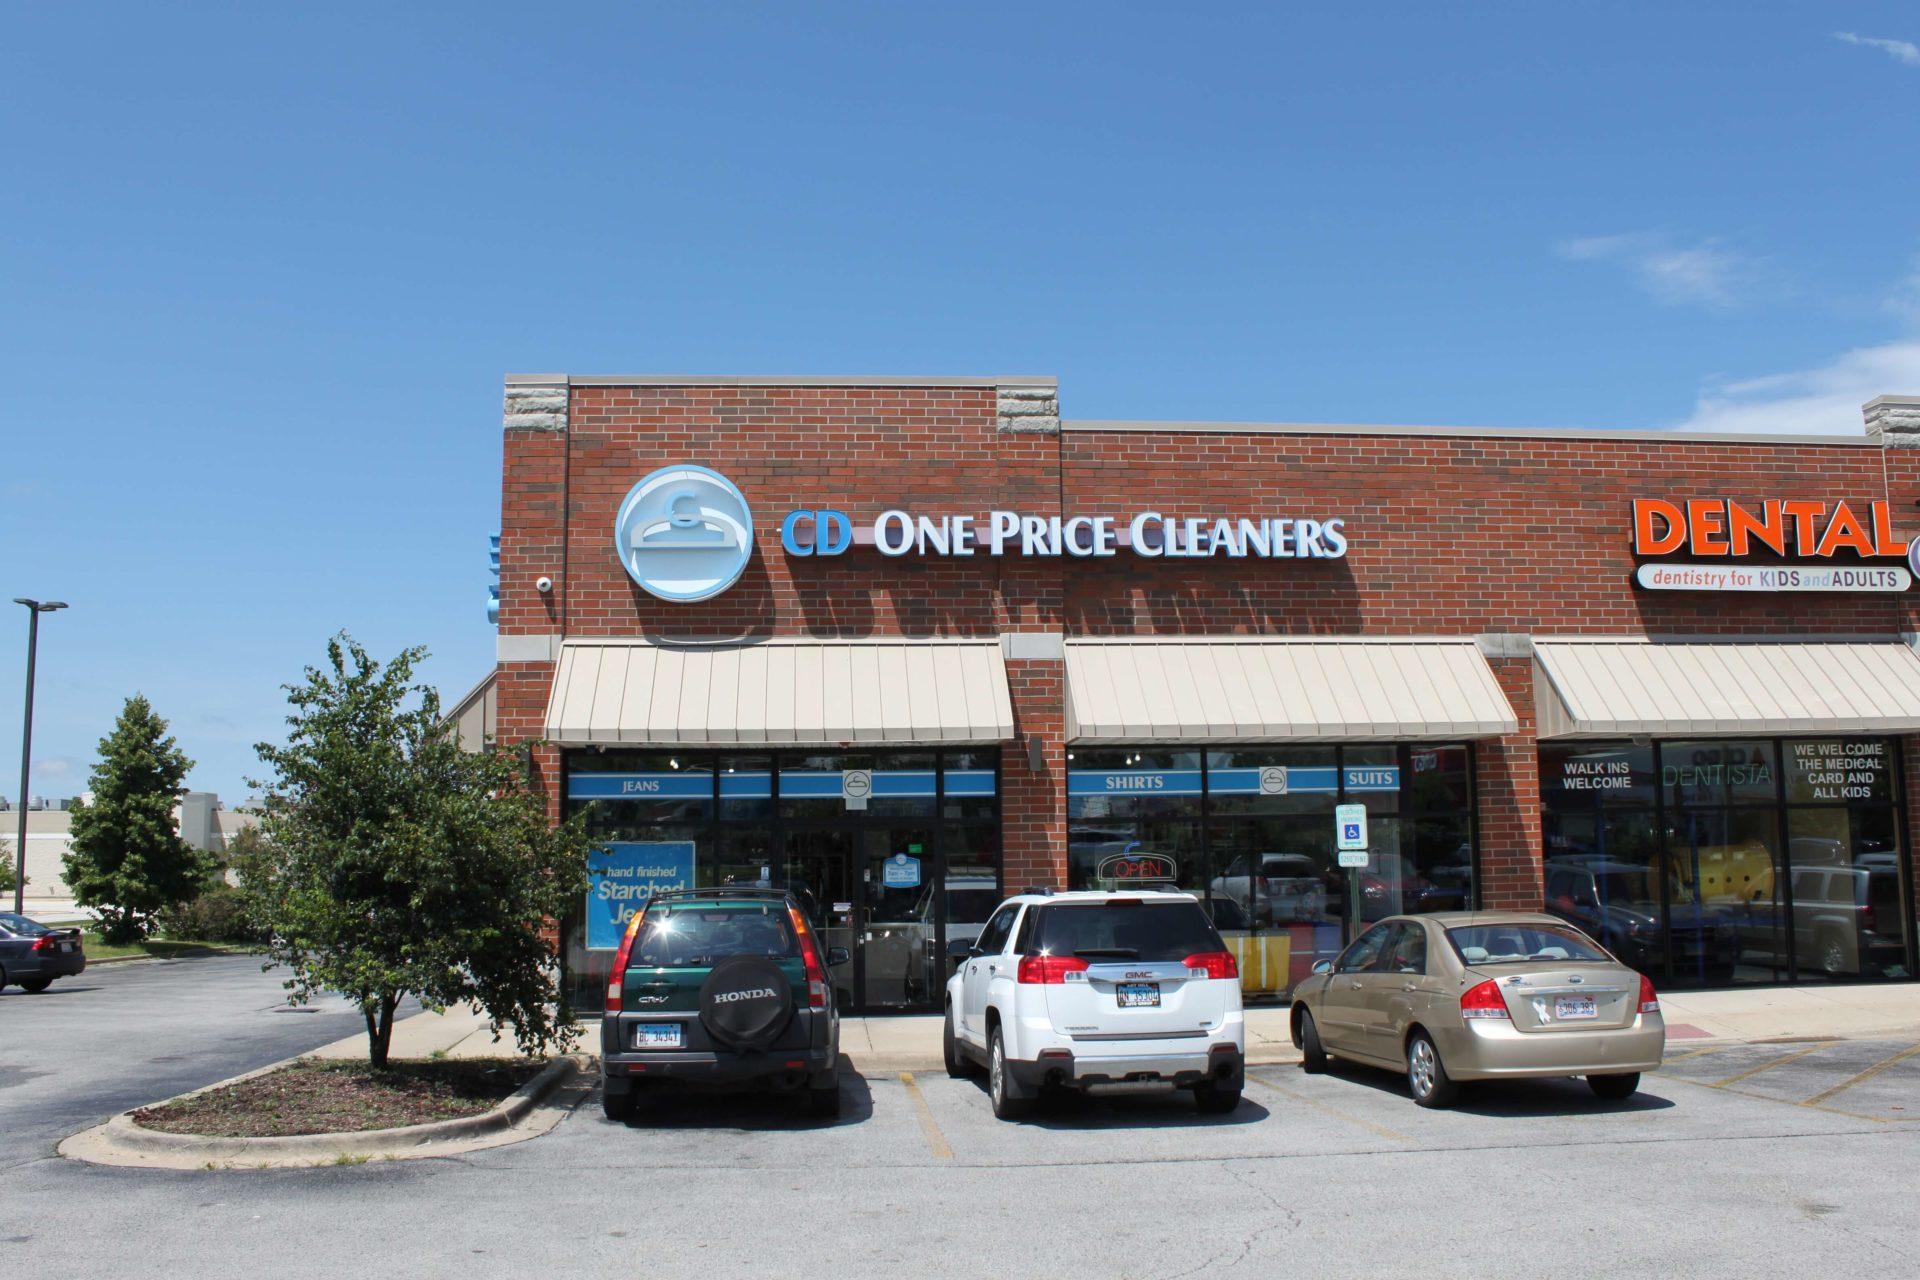 Chicago Heights Dry Cleaners | Dry Cleaning in Chicago Heights | CD One